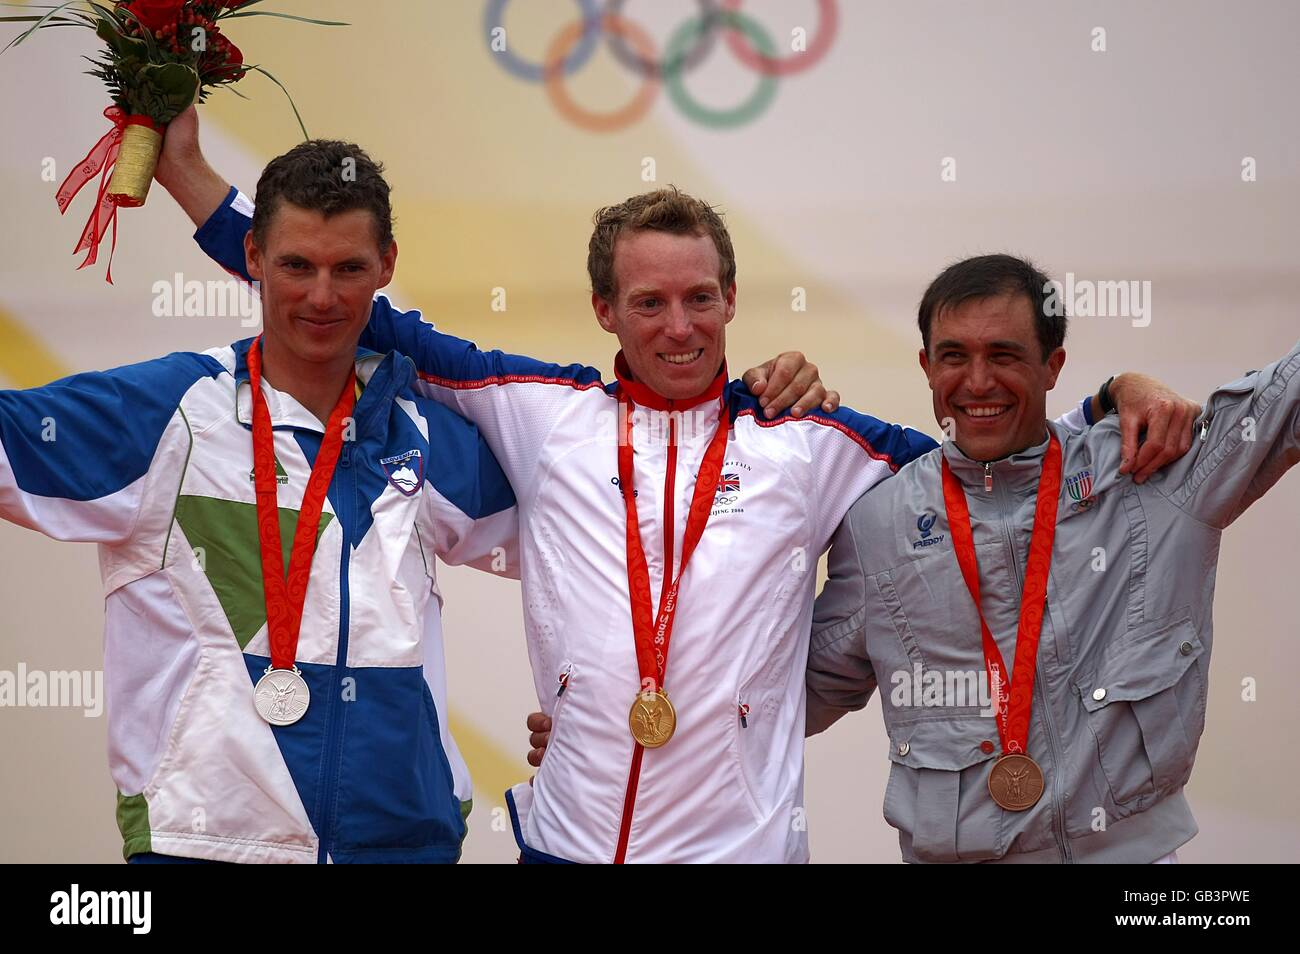 (left to right) Slovenia's Vasilij Zbogar with his silver medal, Great Britain's Paul Goodison with gold and Italy's Diego Romero with bronze during the medal ceremony of the Laser men's class Stock Photo